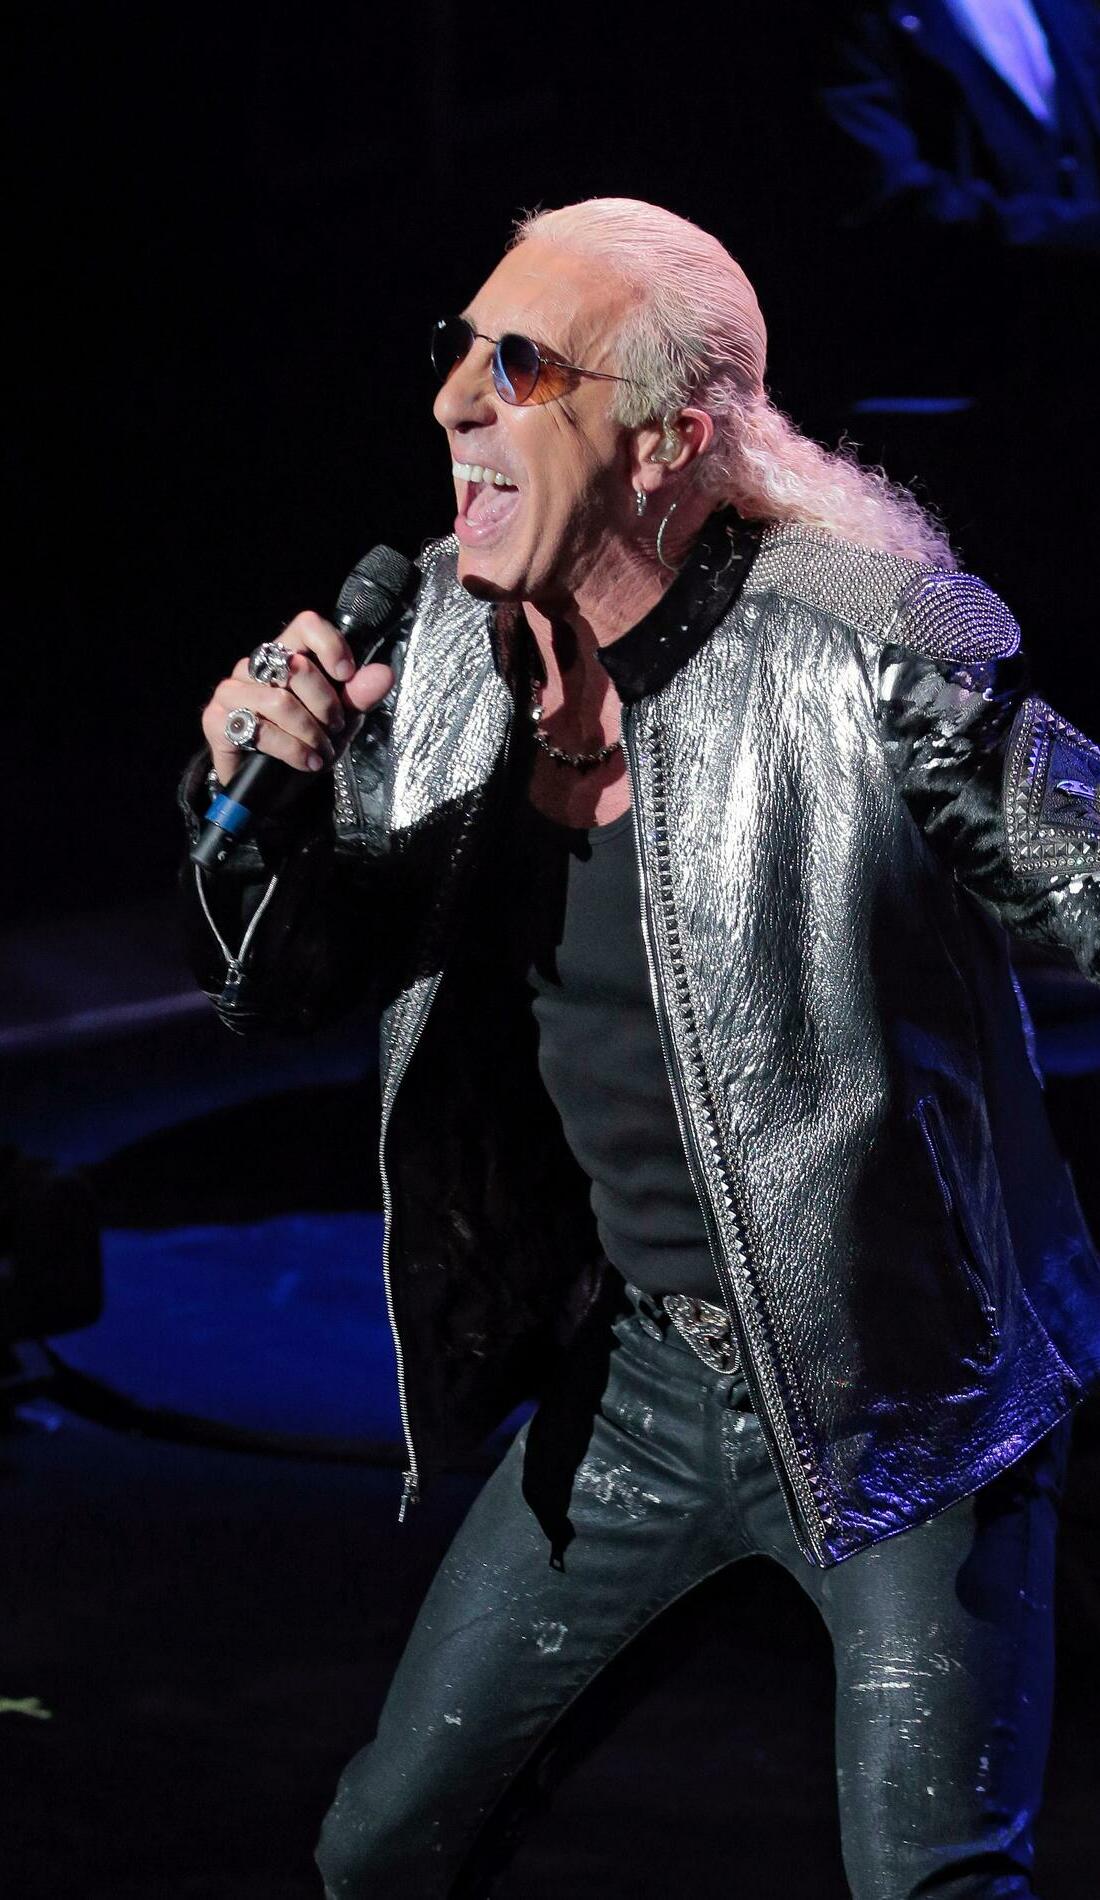 A Dee Snider live event